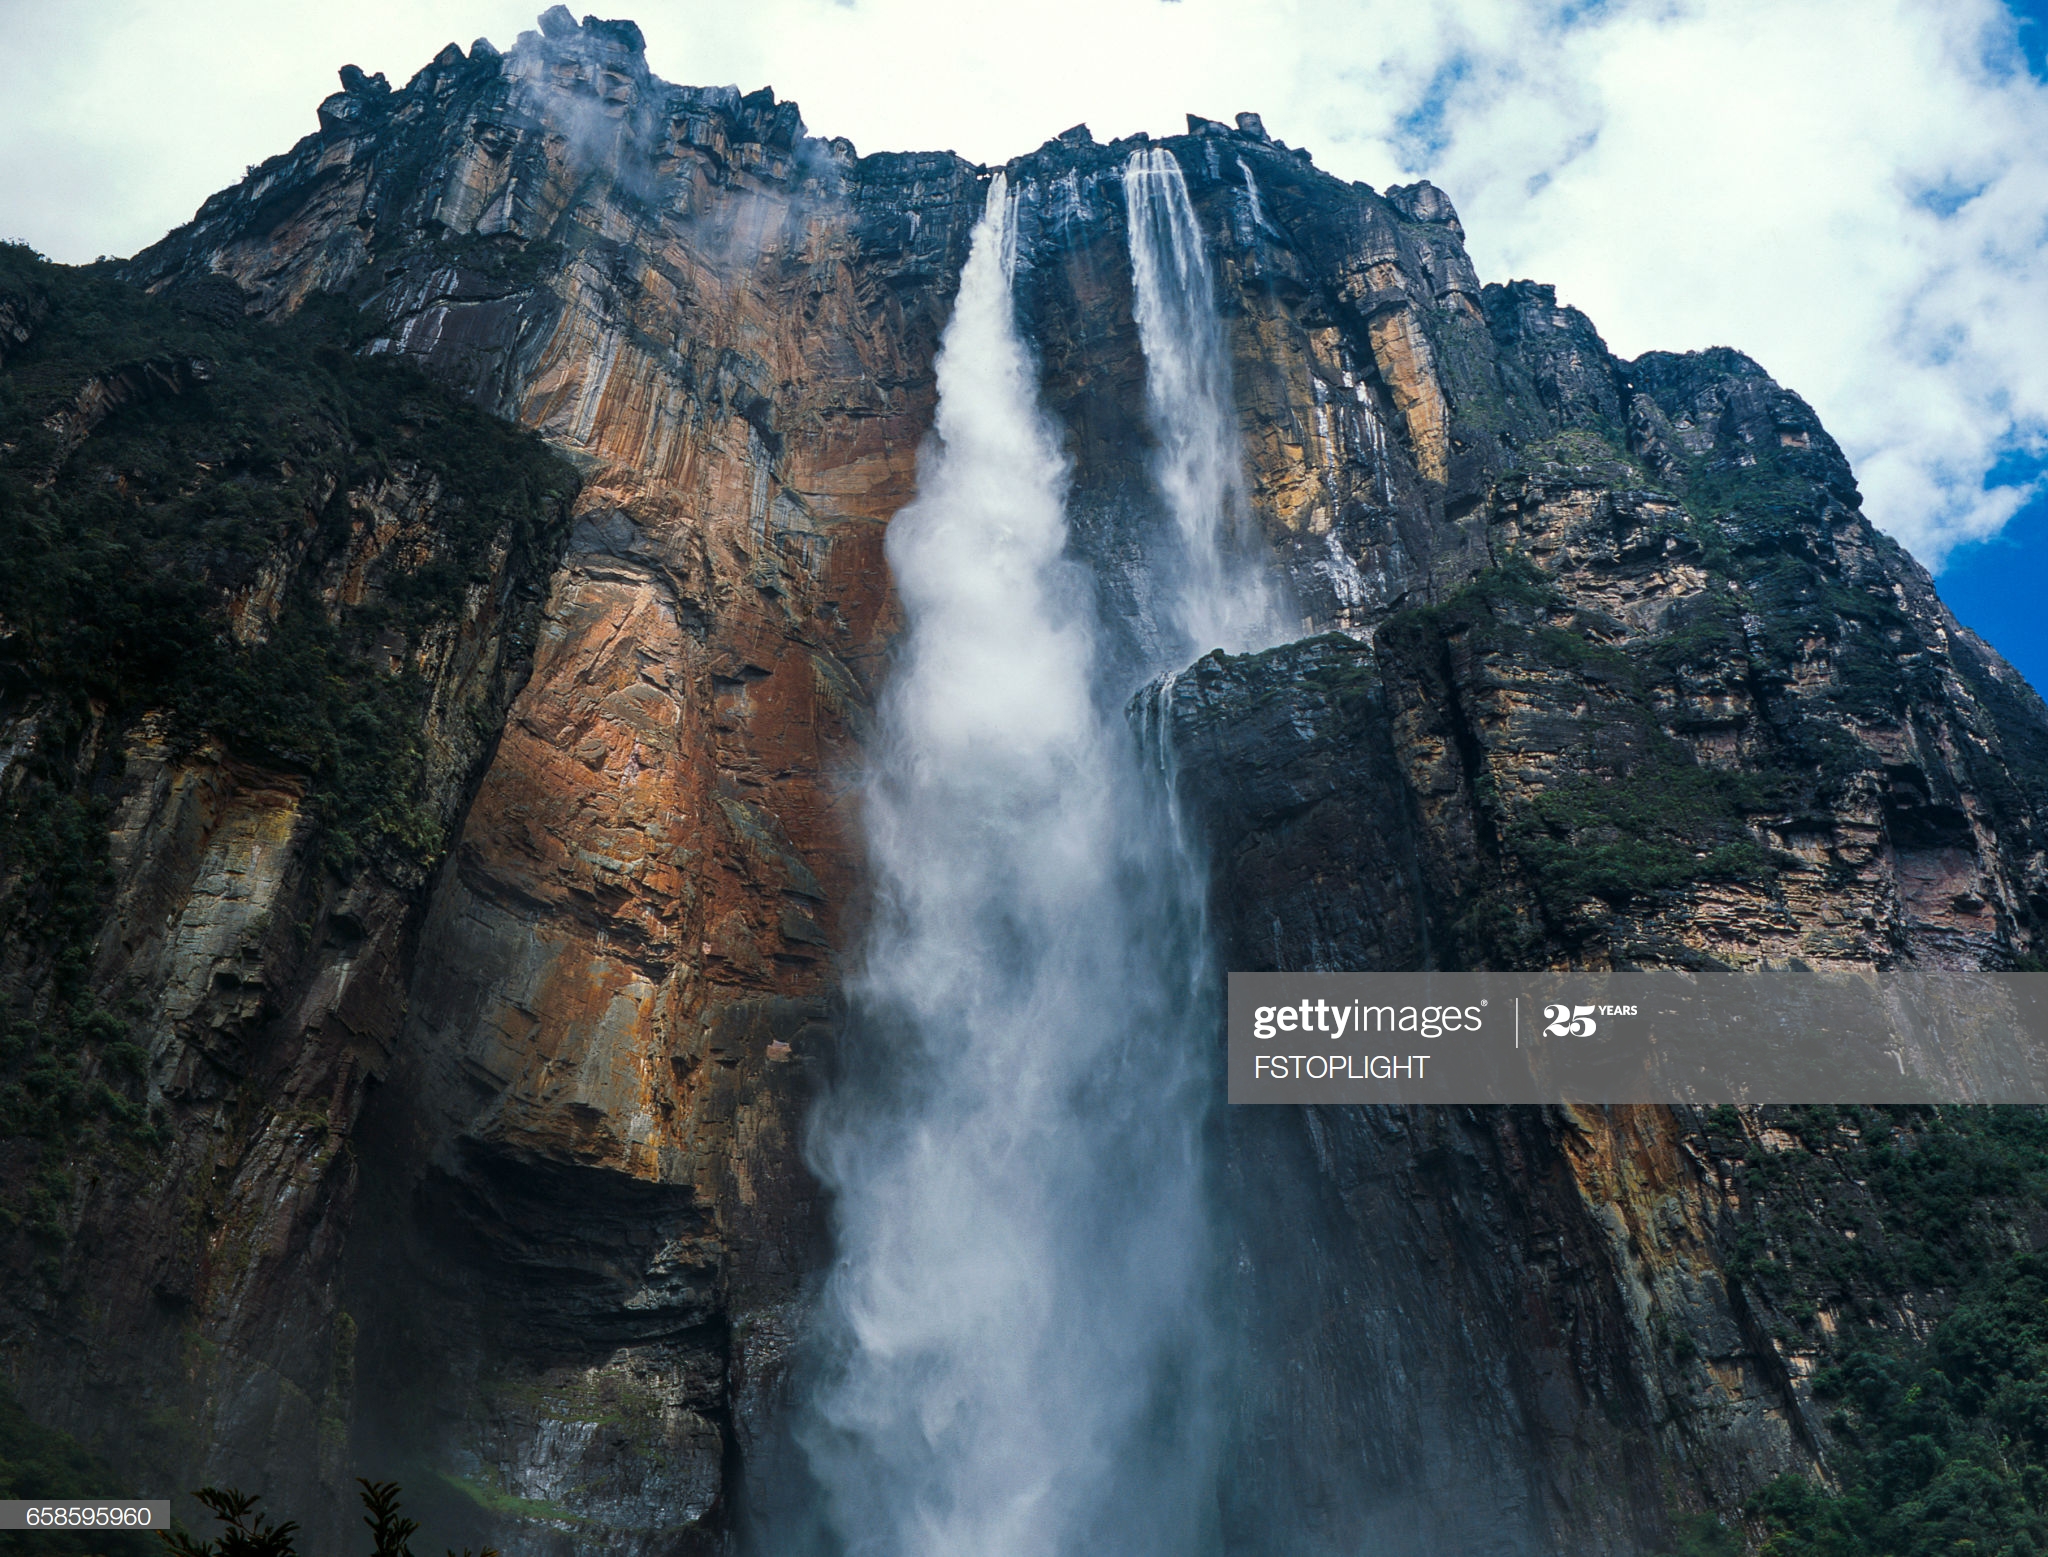 gfpf_gettyimages-658595960-2048x2048.jpg